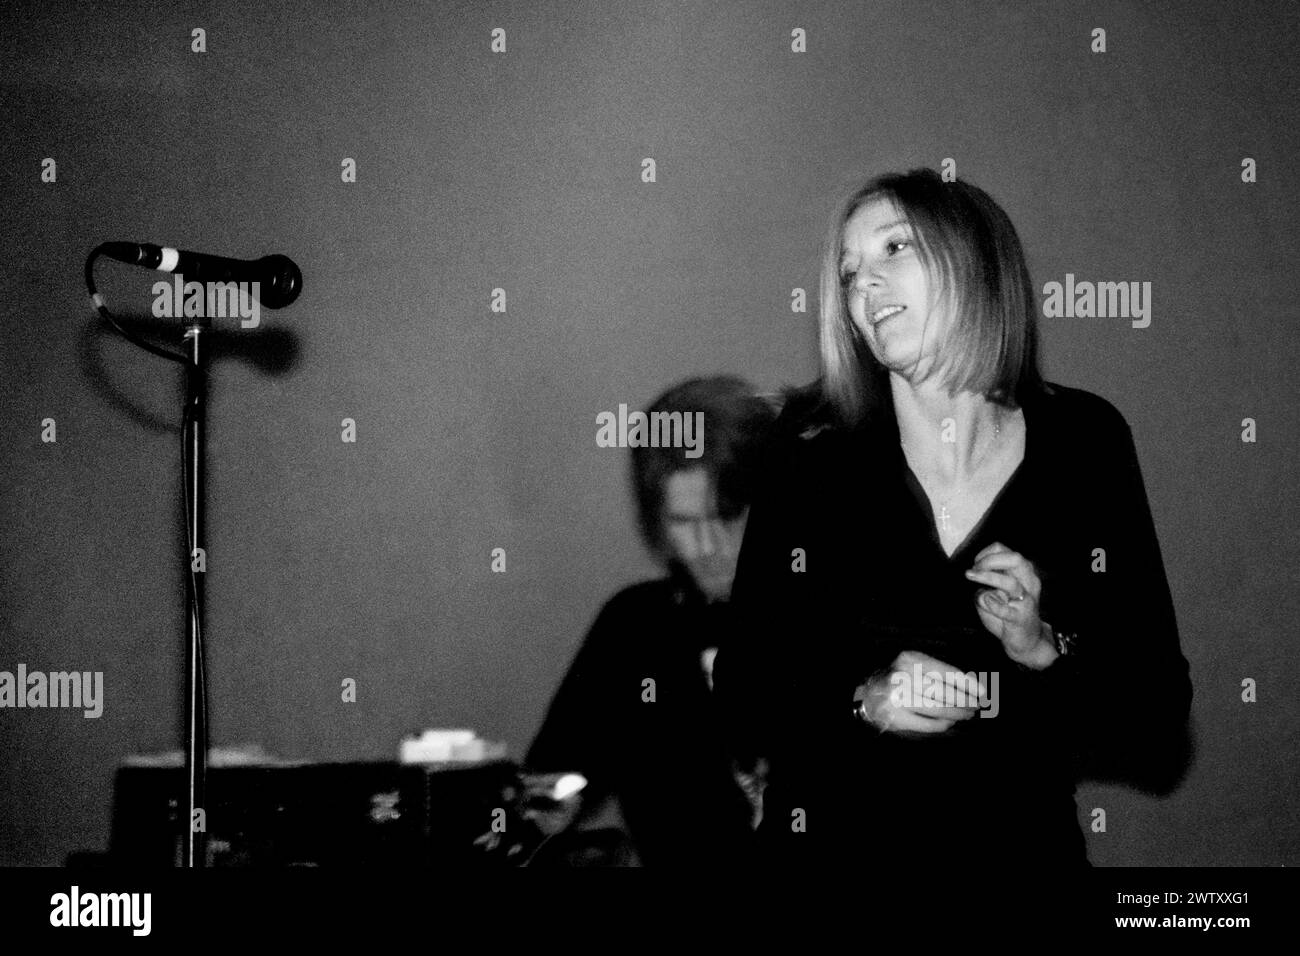 PORTIHEAD, BRISTOL FREE CONCERT, 1998: Beth Gibbons of Portishead singing at Bristol Community Free Festival at Ashton Court, Bristol, England on 19 July 1998. The band were touring with their 2nd album 'Portishead' and went on a 9-year hiatus shortly after this concert. Photo: Rob Watkins.   INFO: Portishead, a British trip-hop band formed in 1991, redefined electronic music with their dark, atmospheric sound. Albums like 'Dummy' showcased their haunting melodies and Beth Gibbons' emotive vocals, cementing their status as pioneers of the genre. Stock Photo